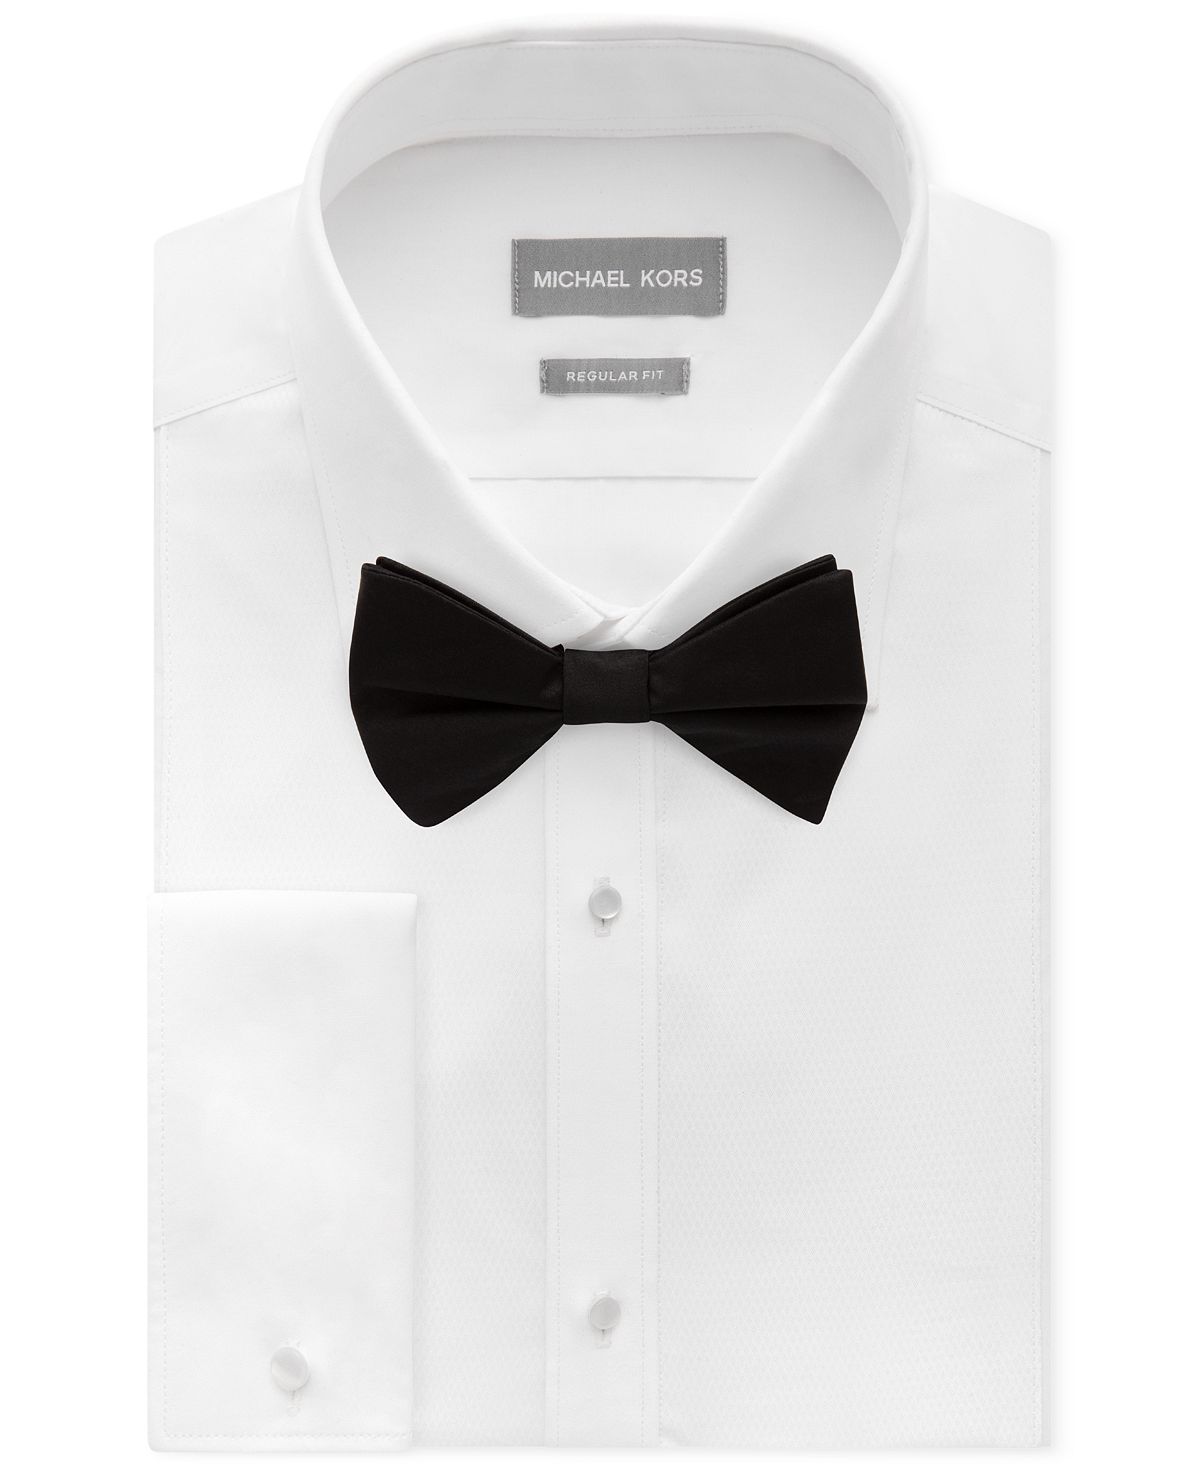 Michael Kors Classic/regular Fit Non-iron Performance French Cuff Formal Dress Shirt & Pre-tied Silk Bow Tie Set White